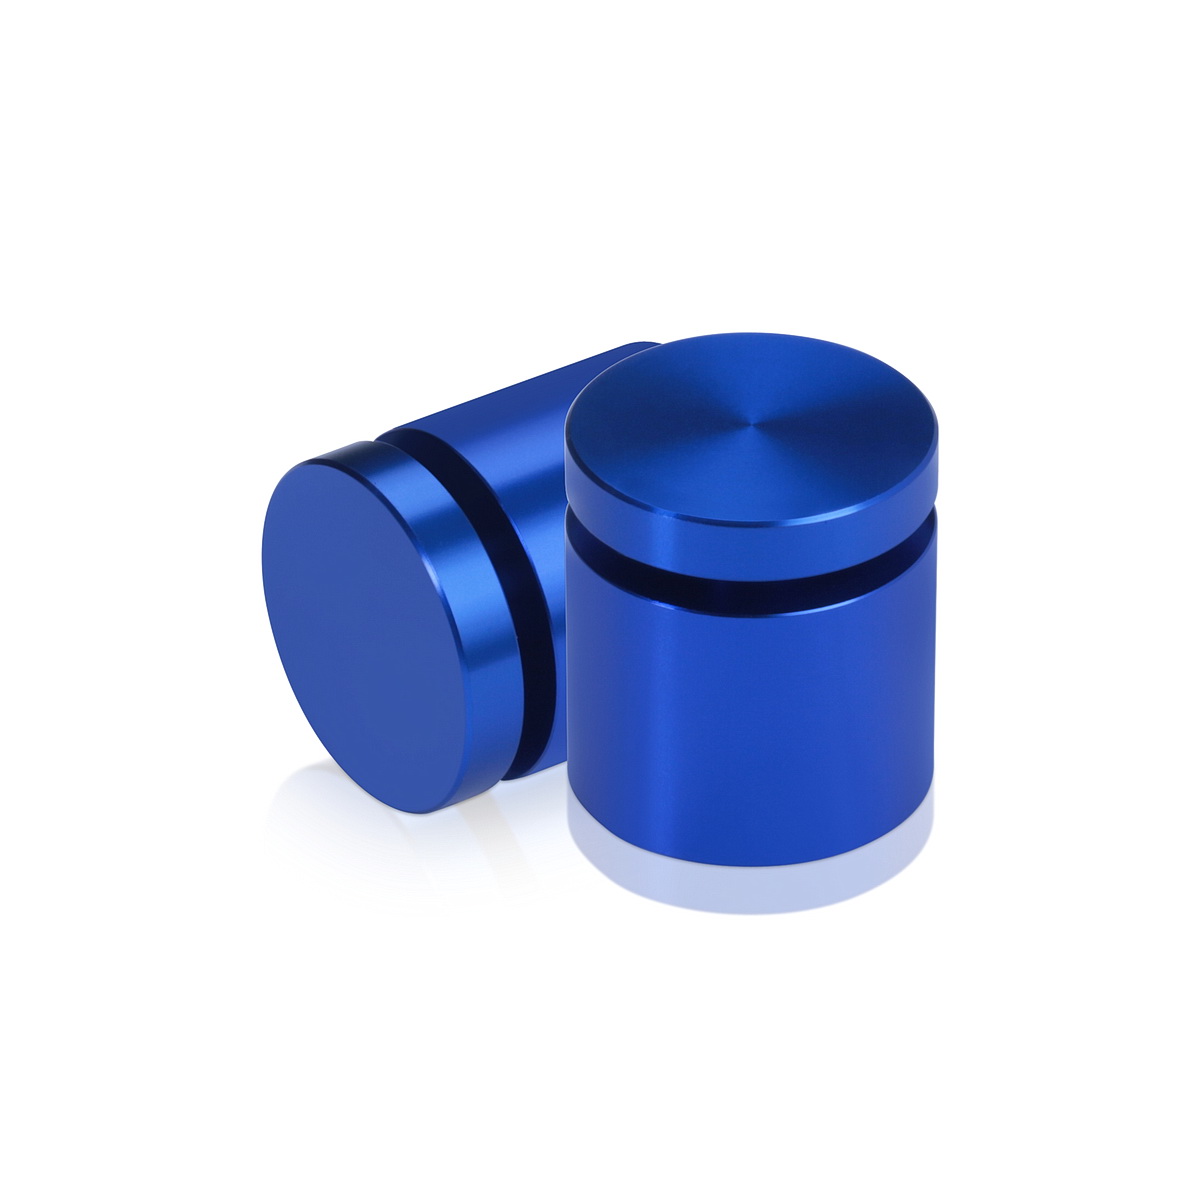 1'' Diameter X 3/4'' Barrel Length, Affordable Aluminum Standoffs, Blue Anodized Finish Easy Fasten Standoff (For Inside / Outside use) [Required Material Hole Size: 7/16'']